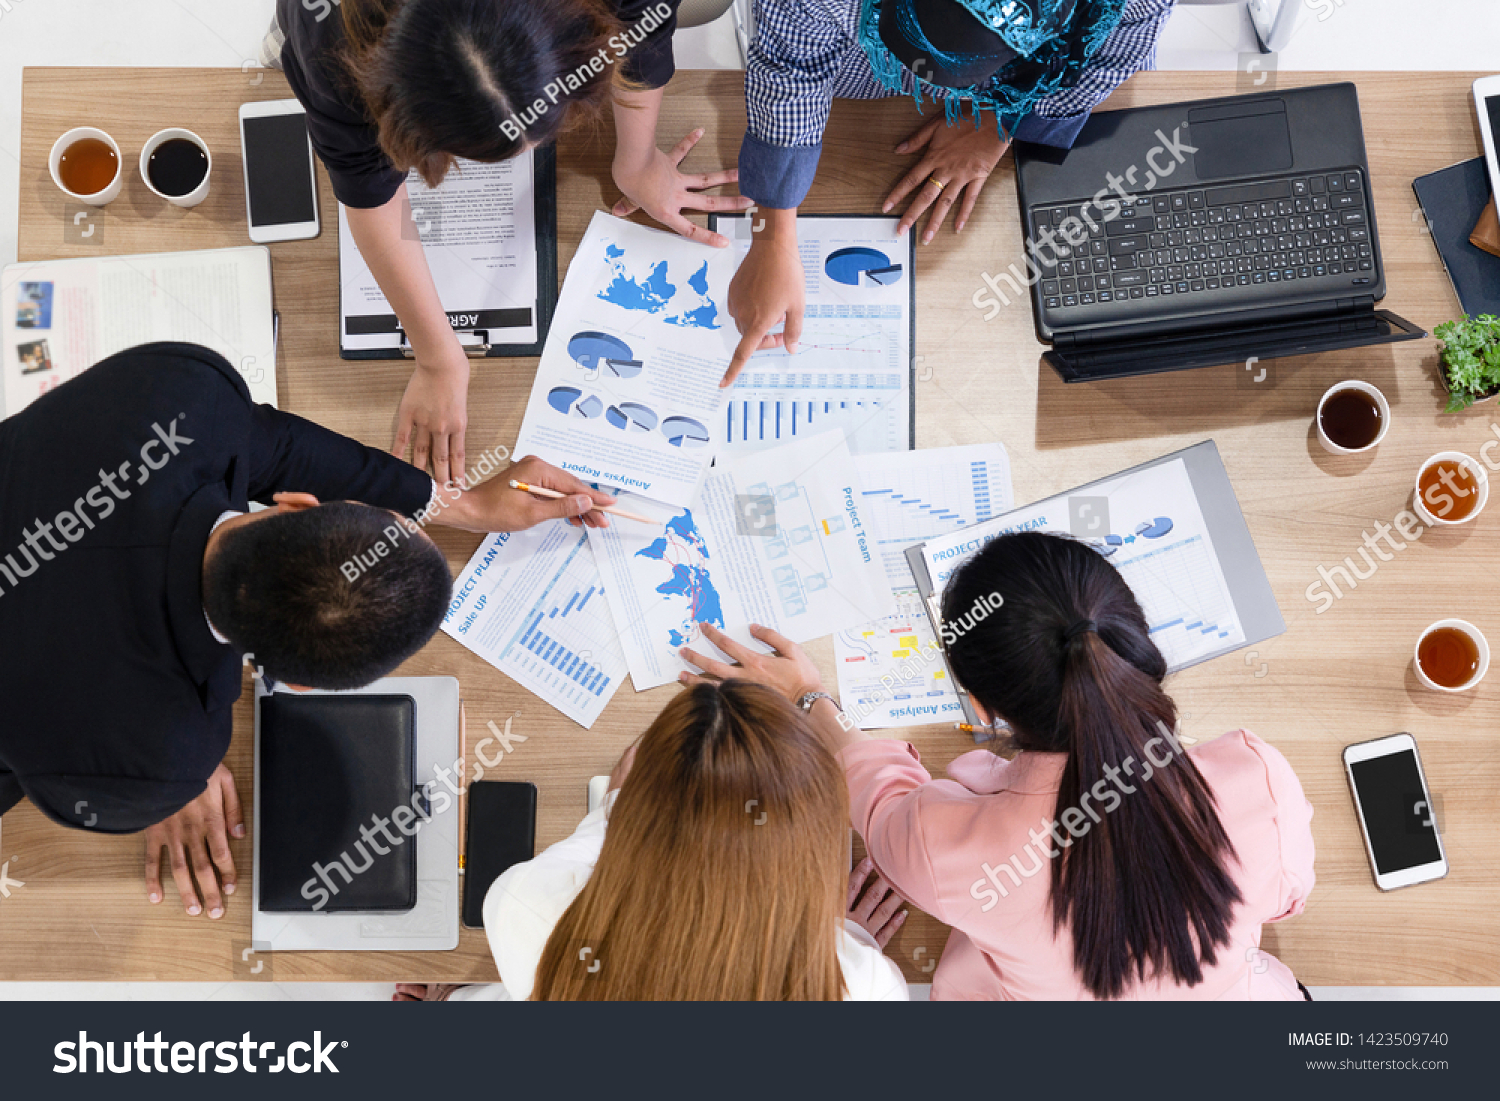 Top view of businessman executive in group meeting with other businessmen and businesswomen in modern office with laptop computer, coffee and document on table. People corporate business team concept. #1423509740